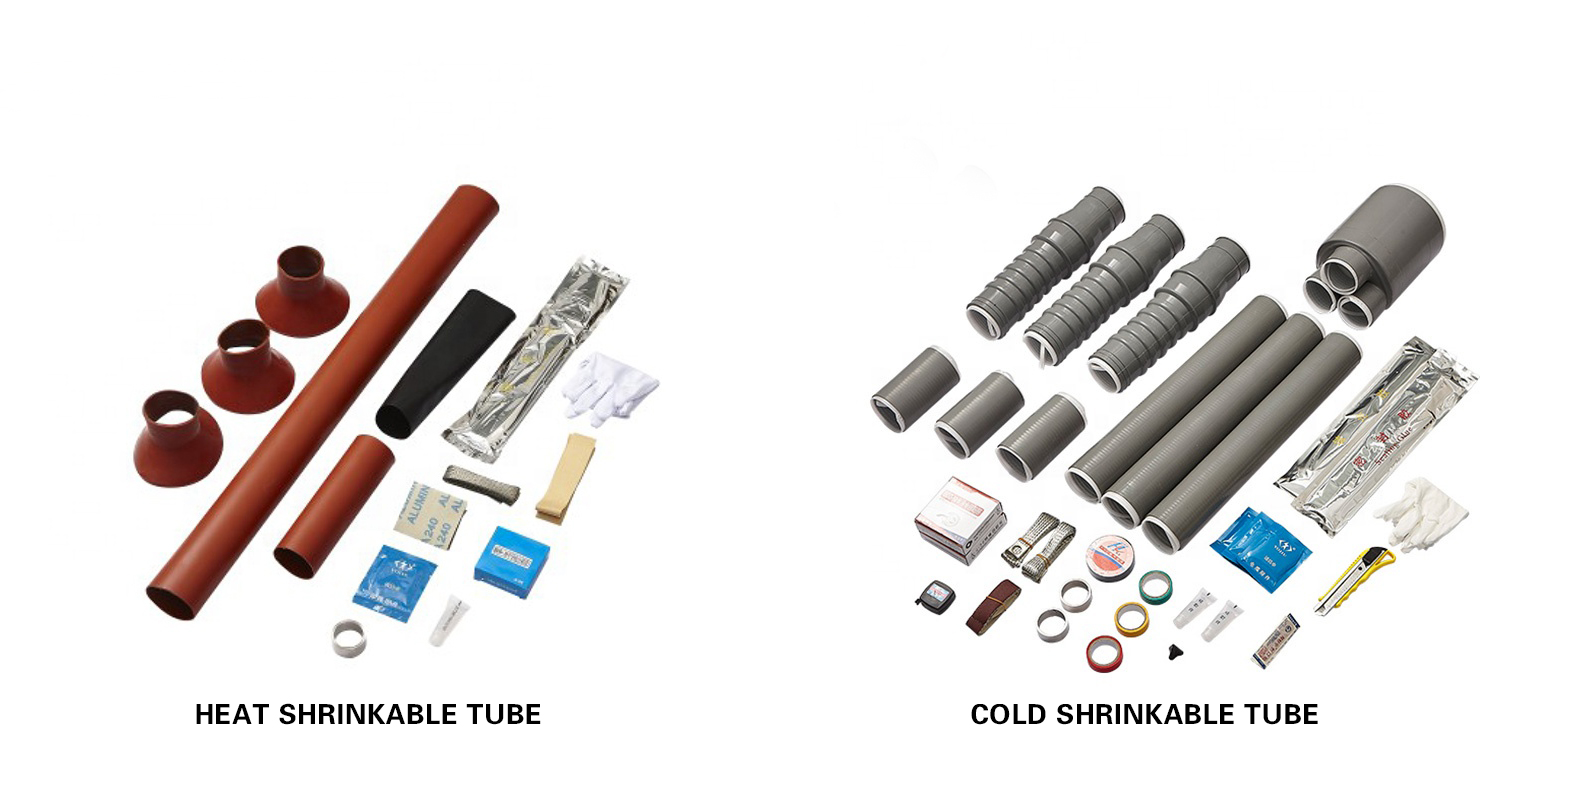 Classification and function of Chinese shrink tube